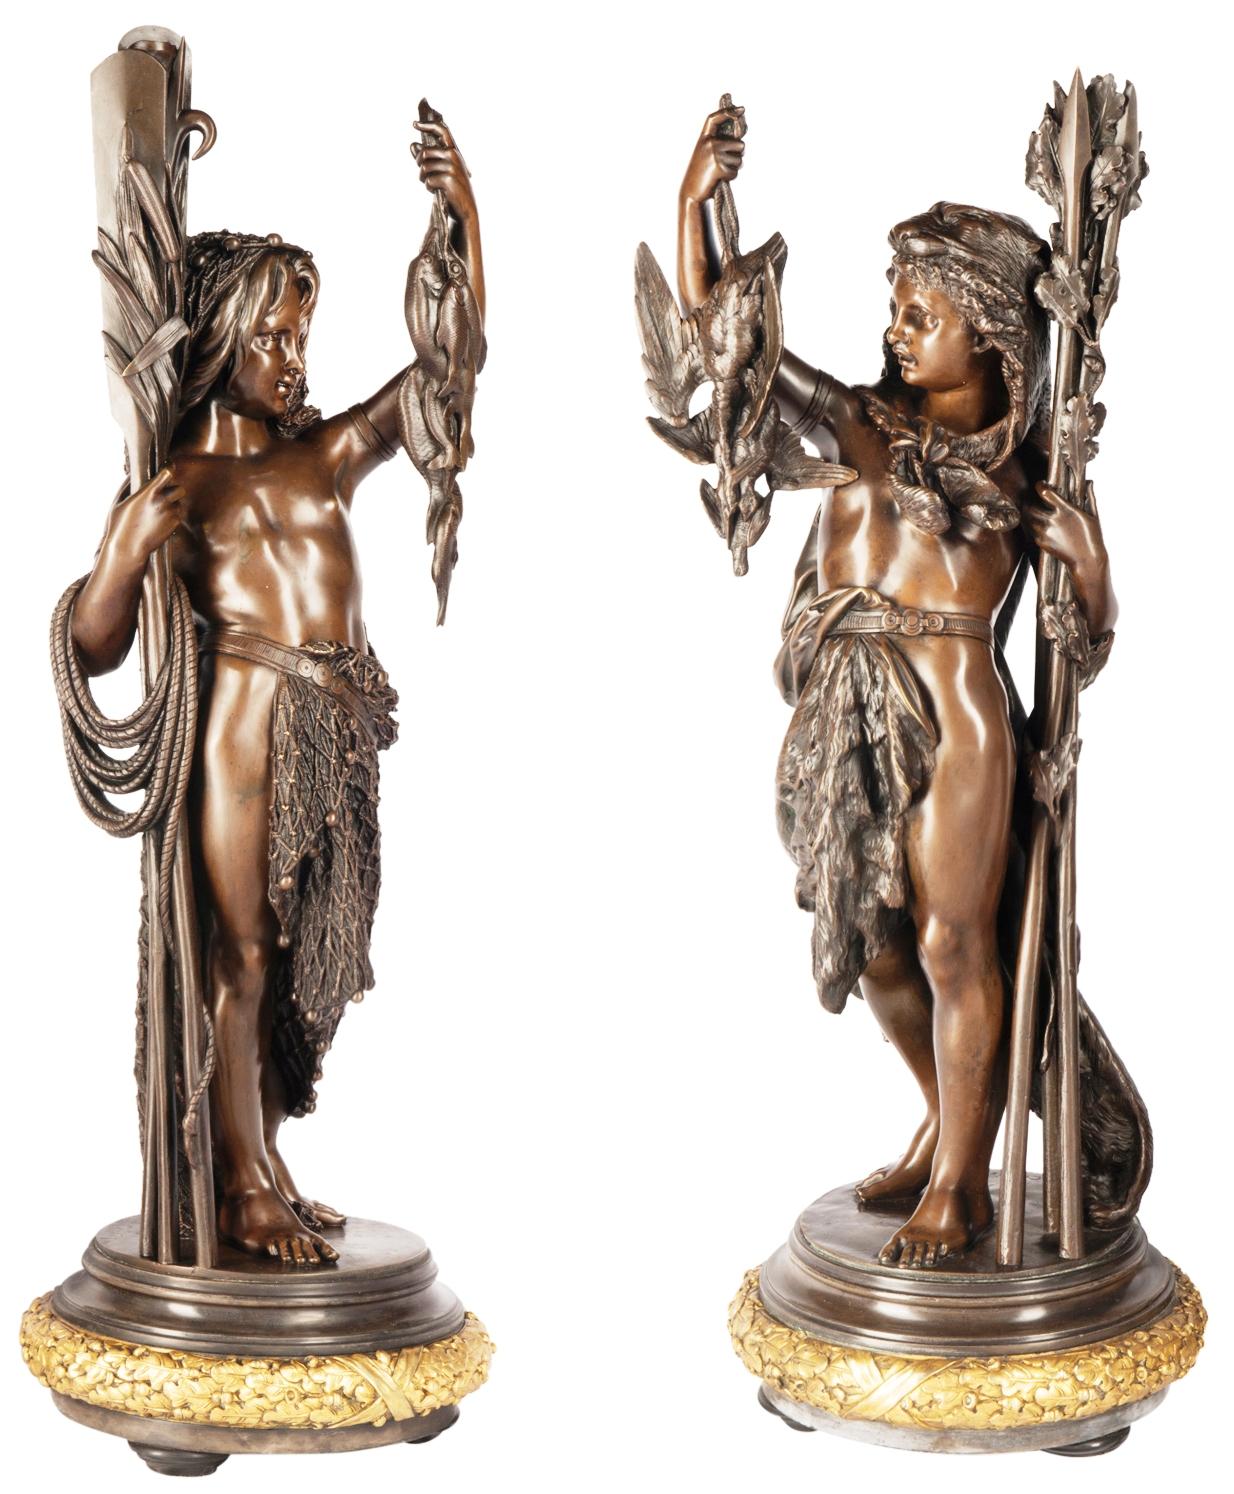 Pair very good quality 19th Century bronze figures representing boys hunting and fishing, mounted on gilded plinths, Signed; 'Carrier'
Albert-Ernest Carrier-Belleuse June 12,1824 - June 3, 1887 Albert-Ernest Carrier-Belleuse French sculptor. One of